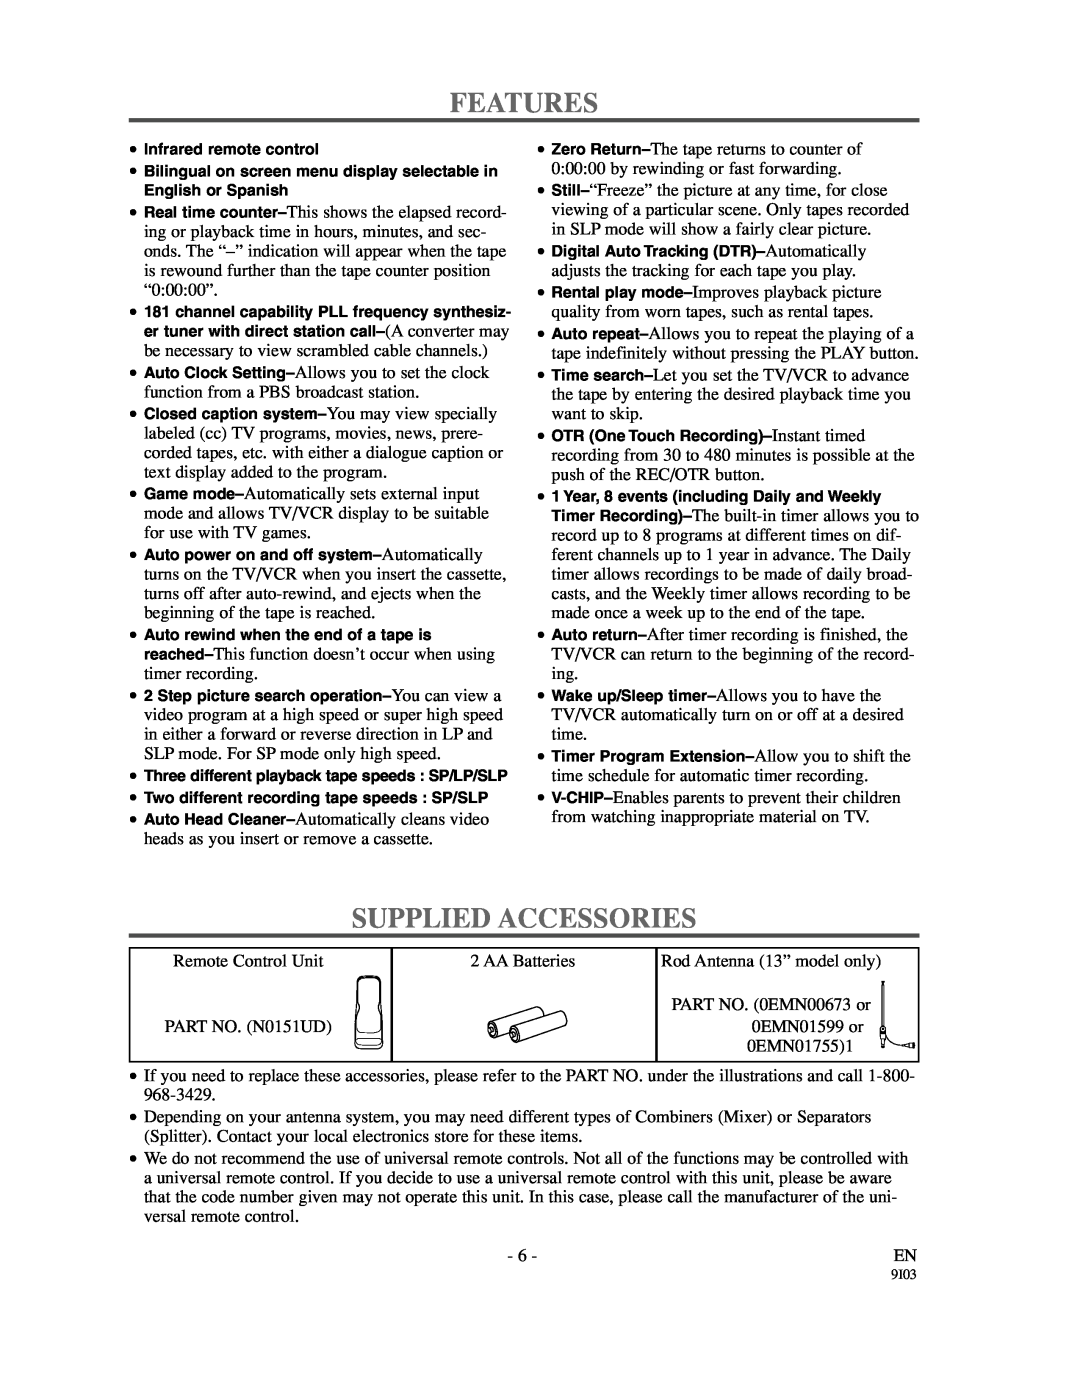 Sylvania 6313CC owner manual Features, Supplied Accessories 